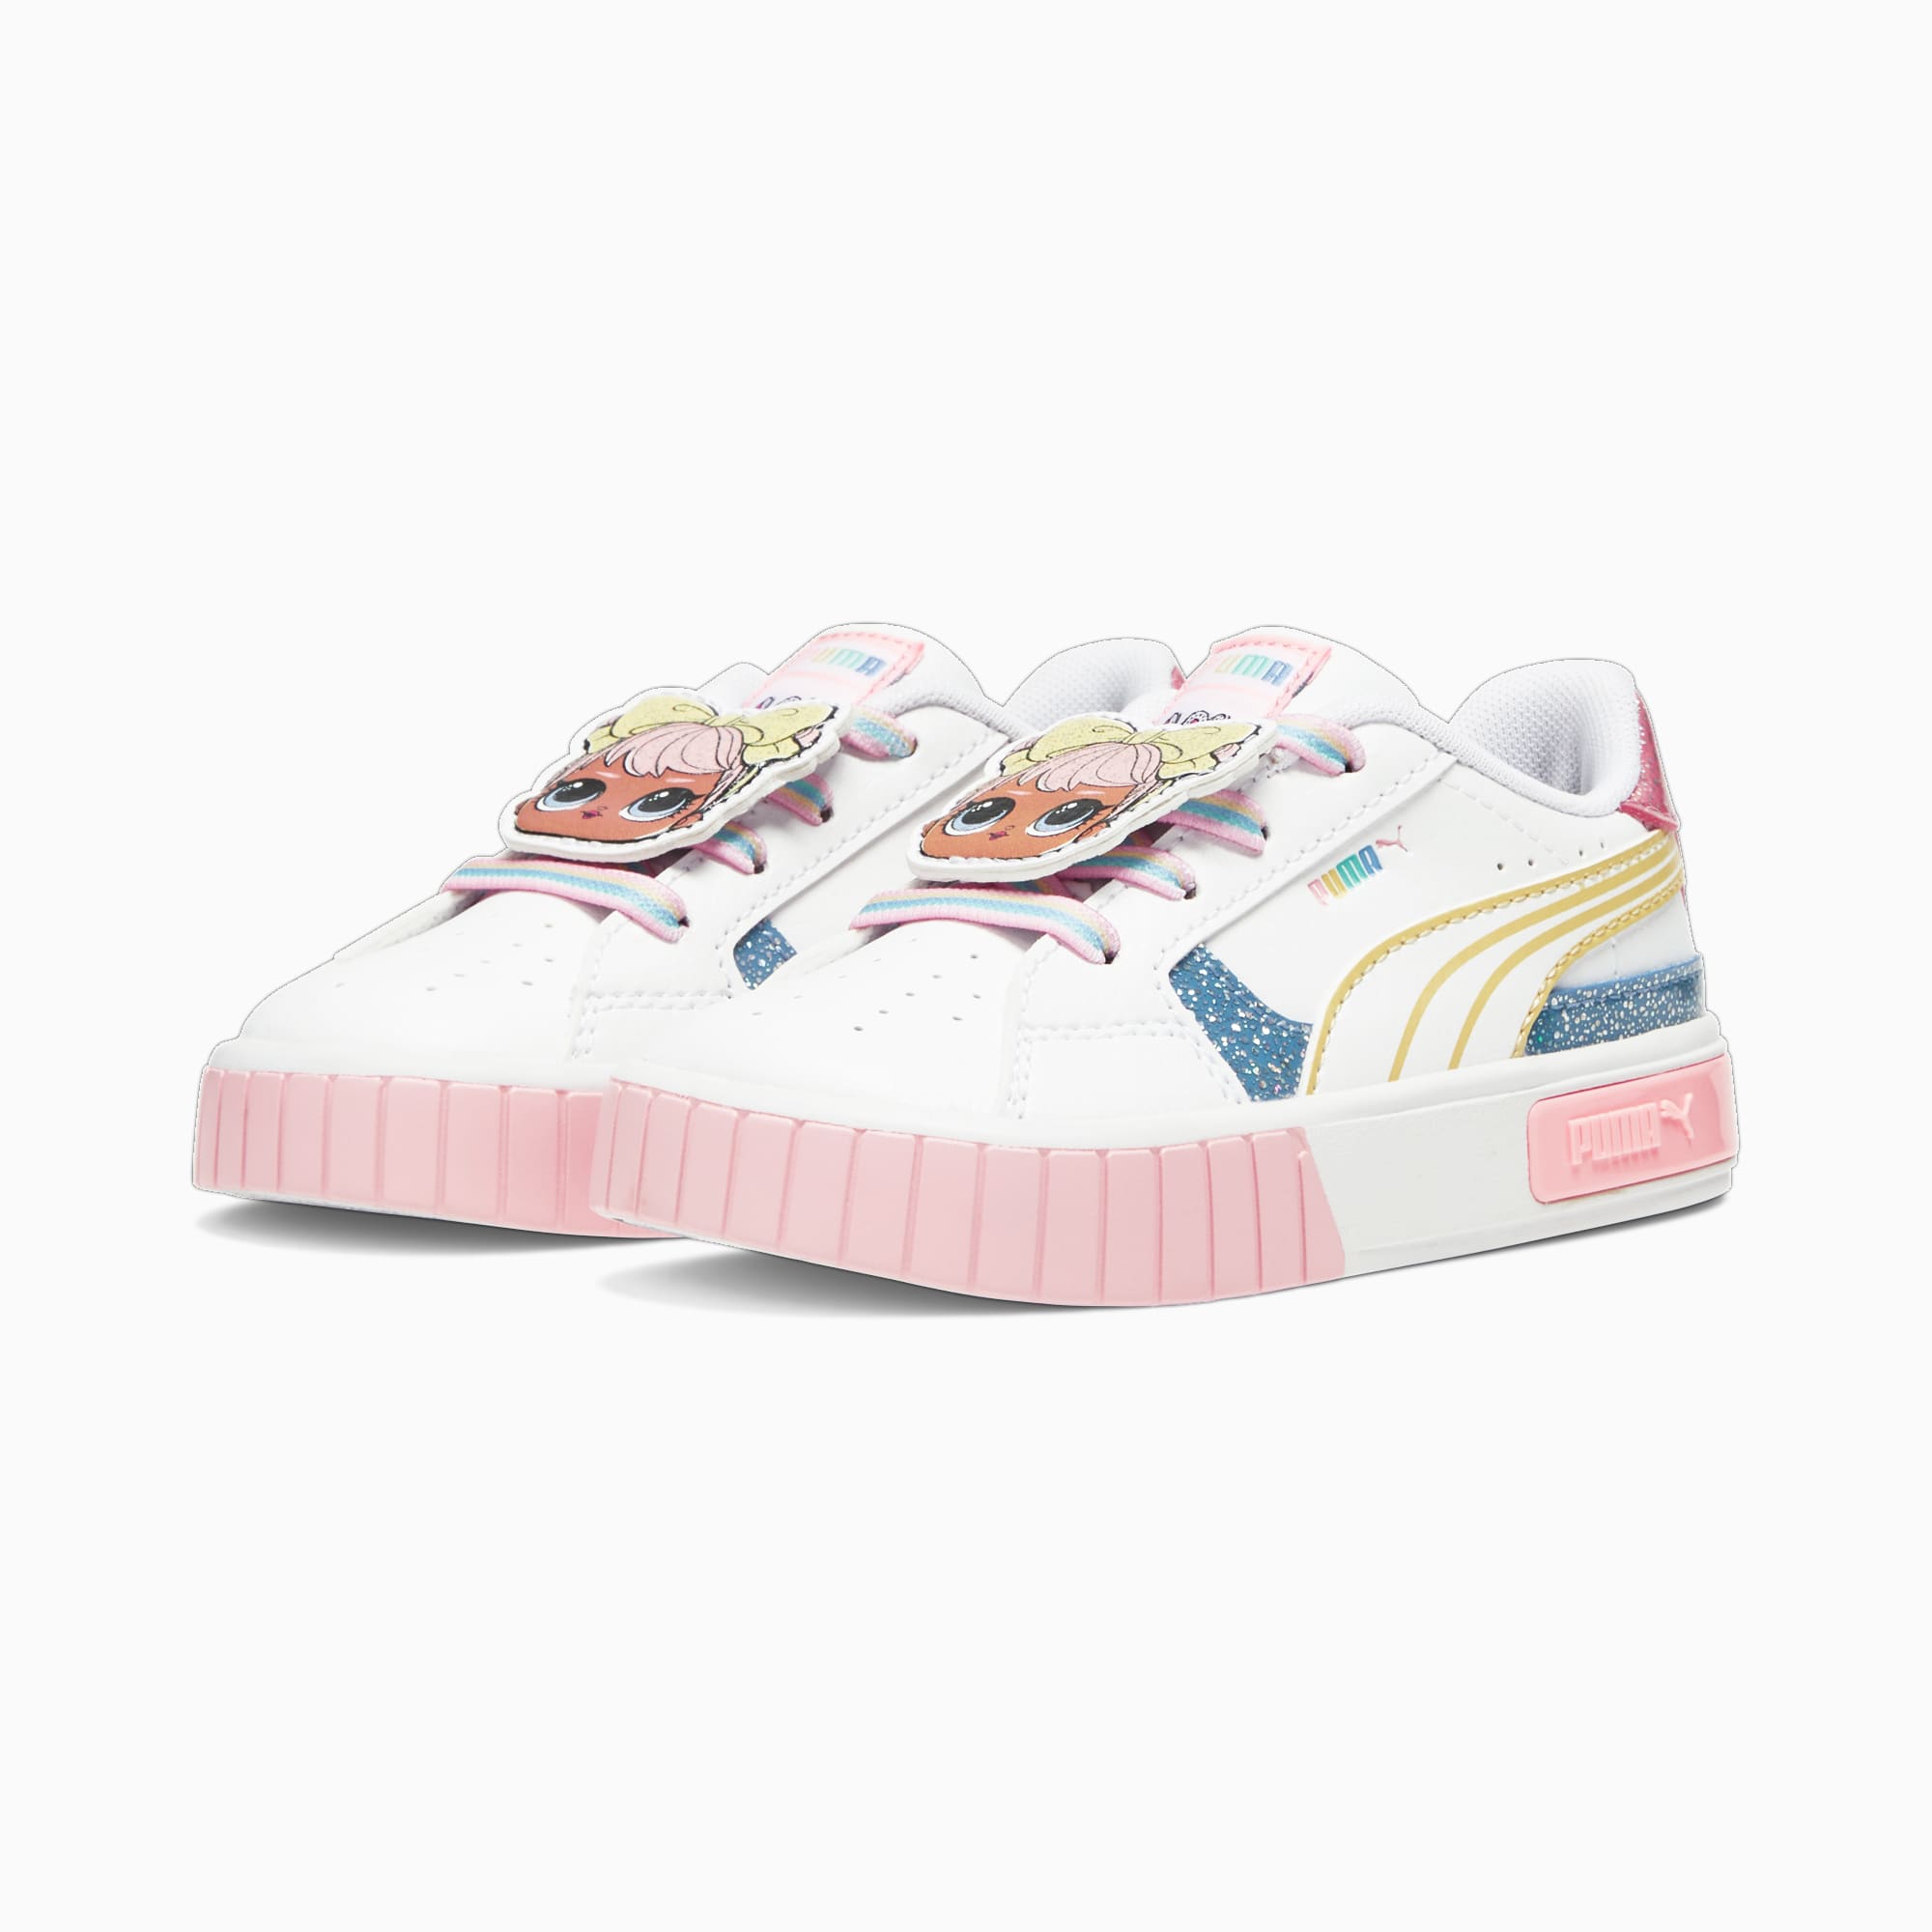 PUMA X Lol Surprise Cali Star Toddlers' Sneakers, White/Flaxen/Racing Blue